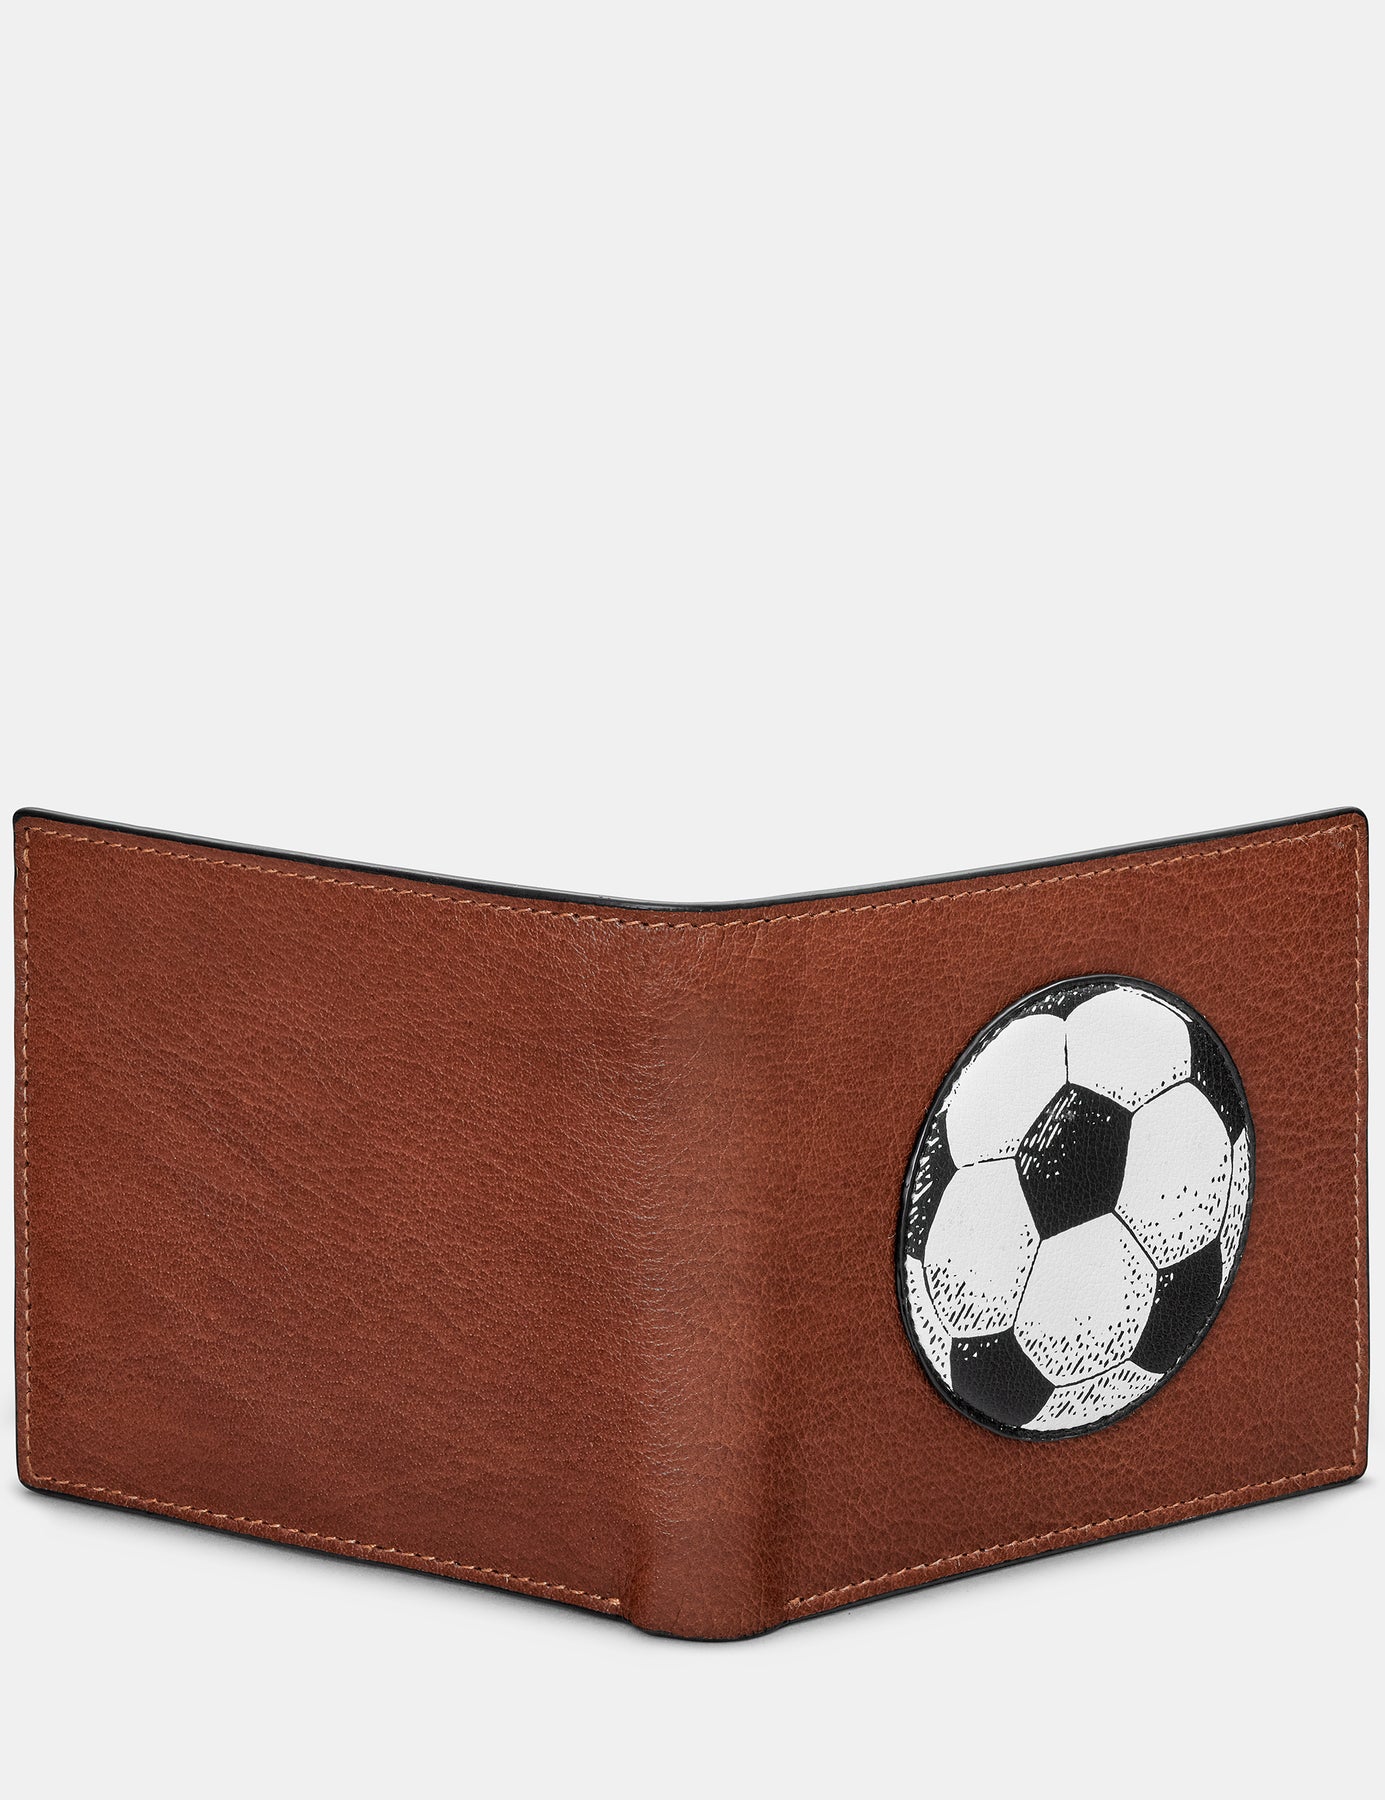 Personalised Football Purse Coin Pouch / Wallet for Sport Loving Children  Boy or Girl, Small Gift Under 10 With Free UK Delivery - Etsy